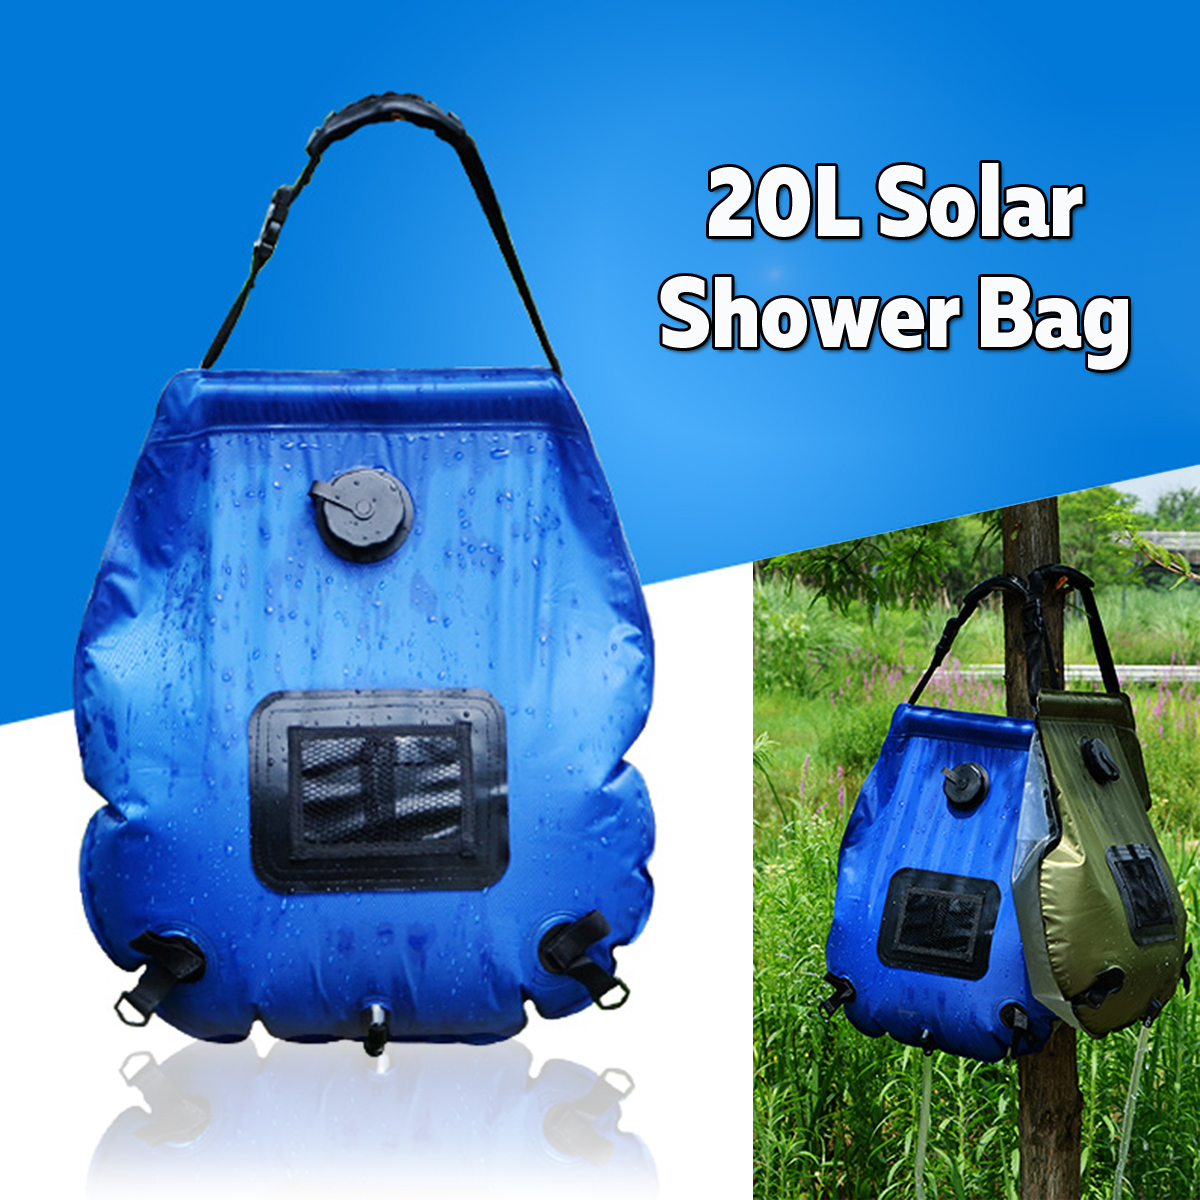 20L-Foldable-Portable-Water-Shower-Bathing-Bag-Solar-Energy-Heated-PVC-Outdoor-Travel-Camping-1724741-1